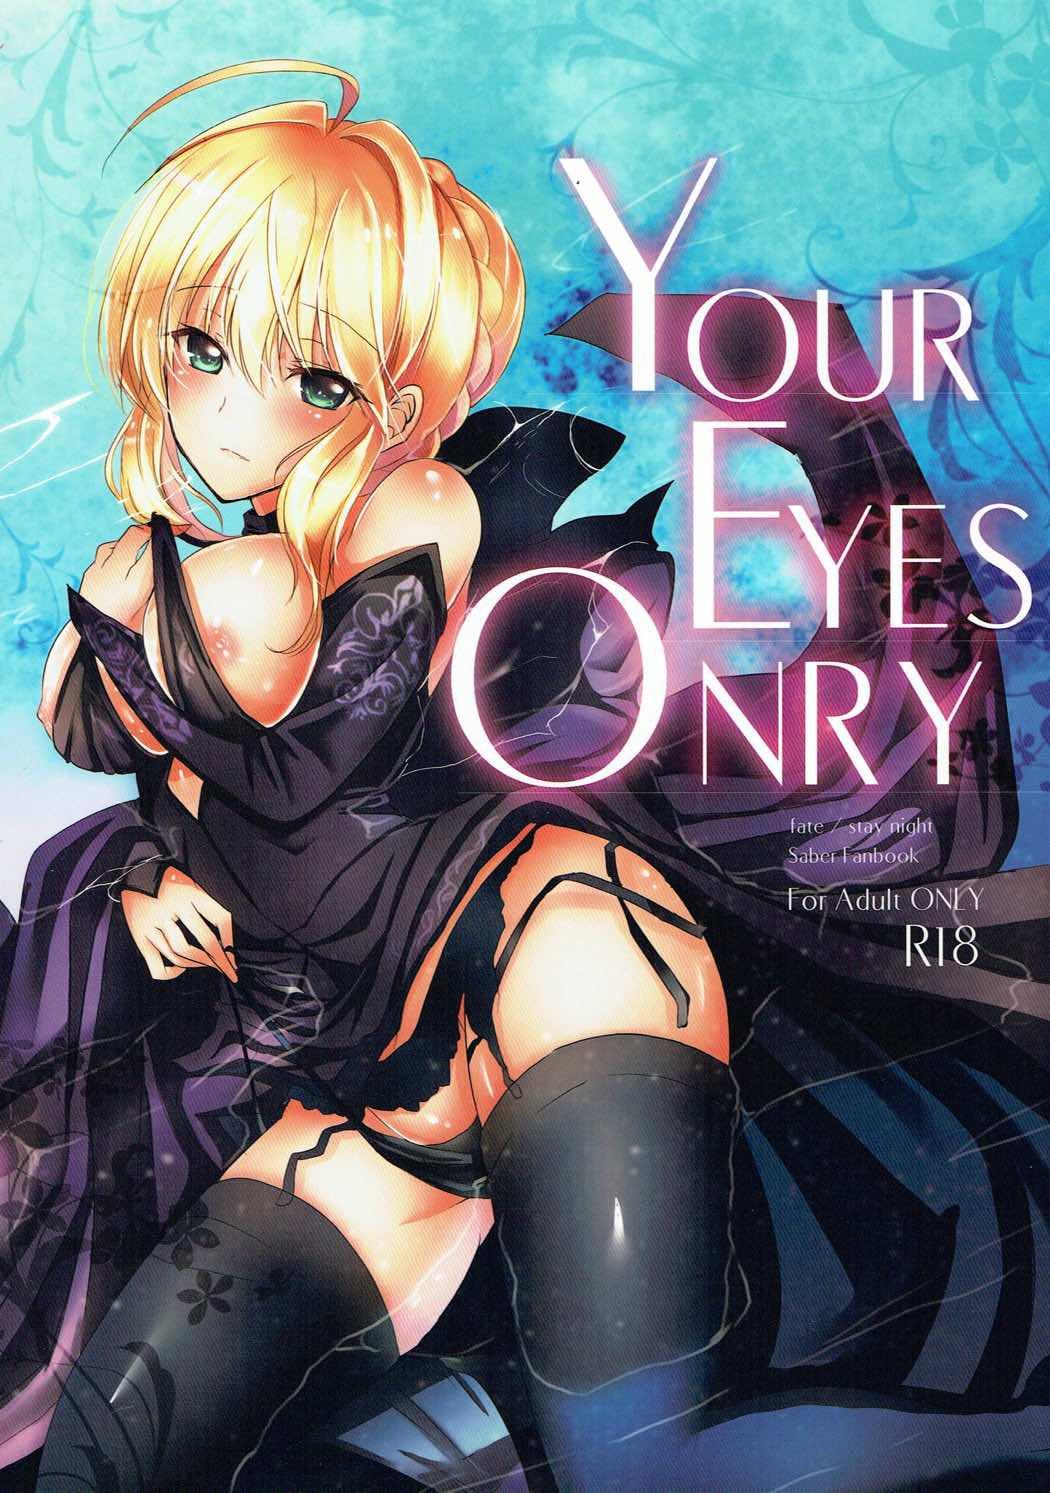 YOUR EYES ONRY 0